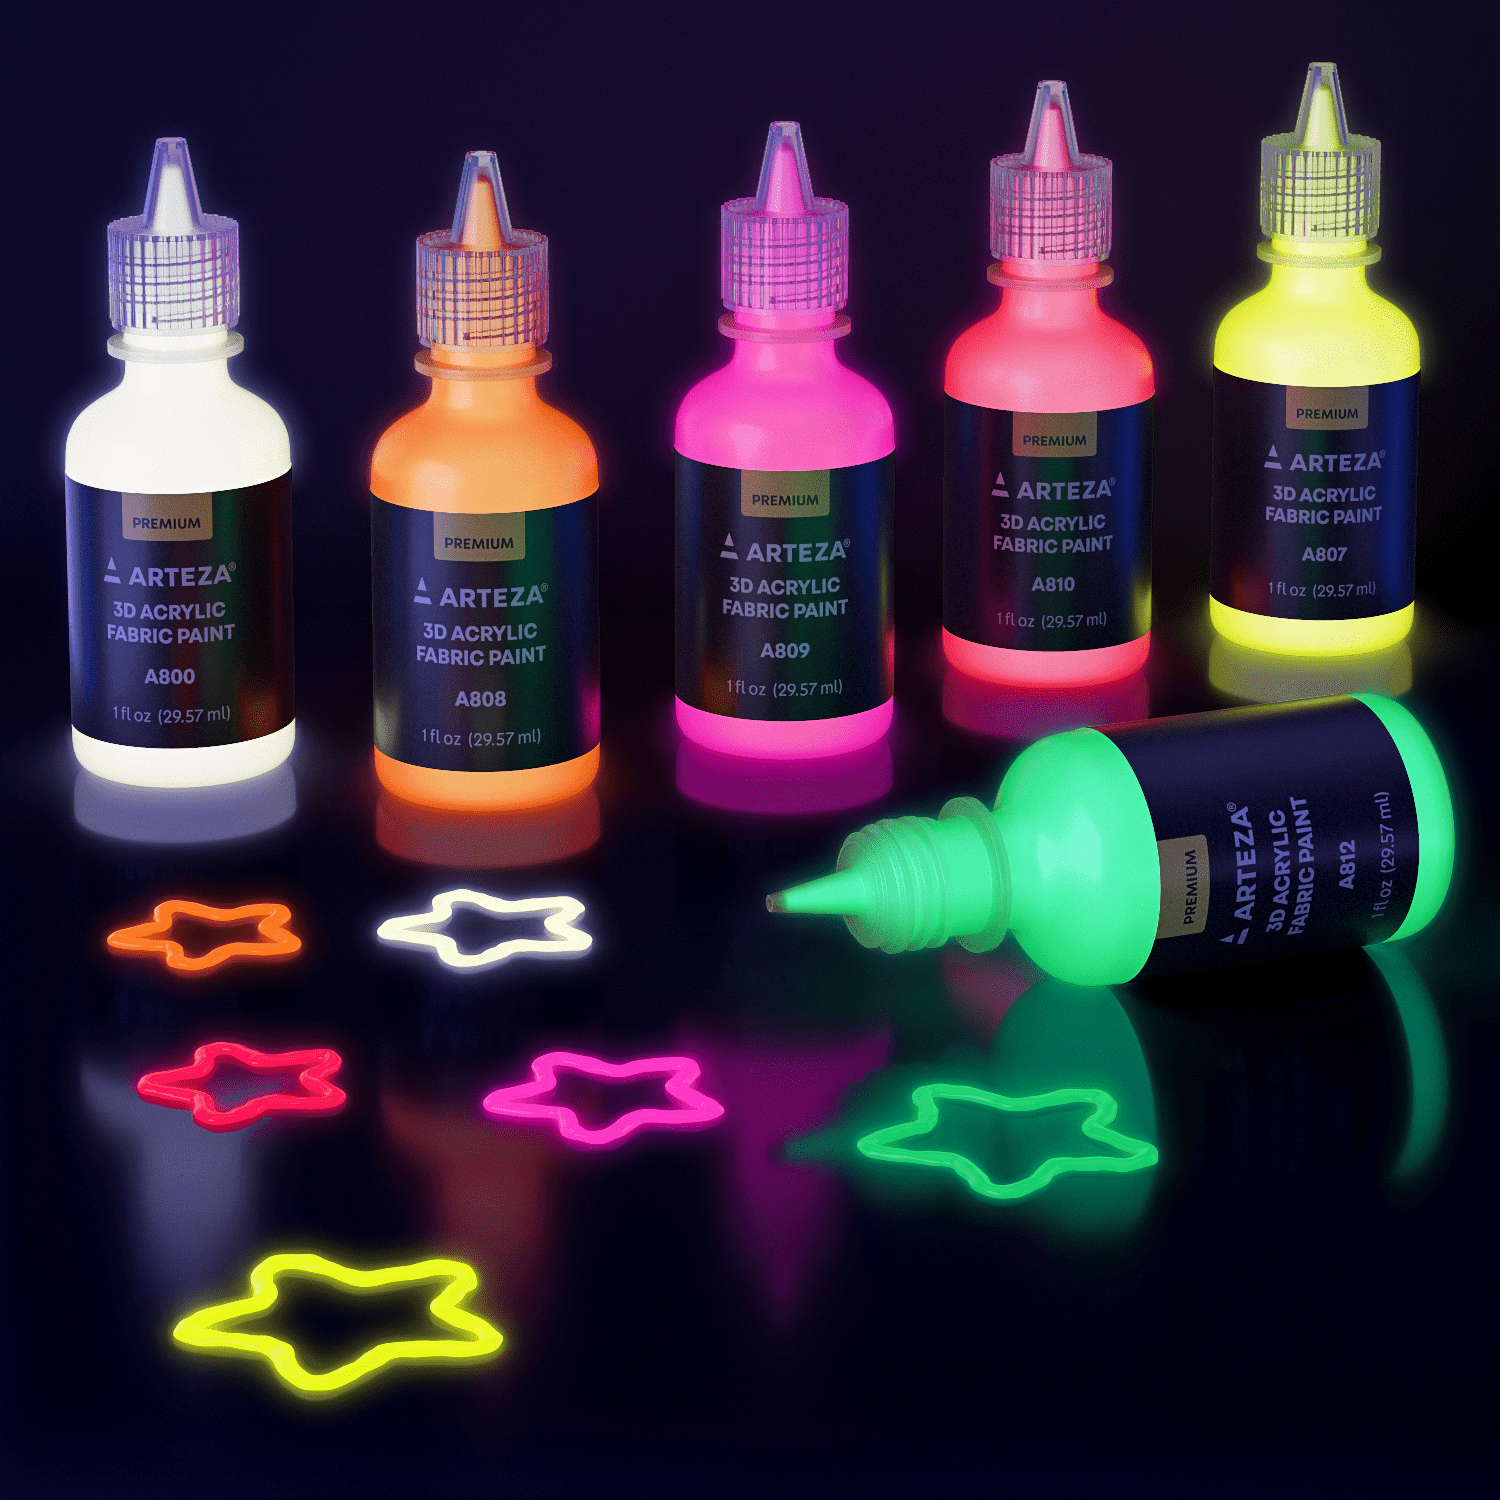 GLOW IN THE DARK FABRIC PAINT 50ML - PINK - M.T.S. Arts & Crafts